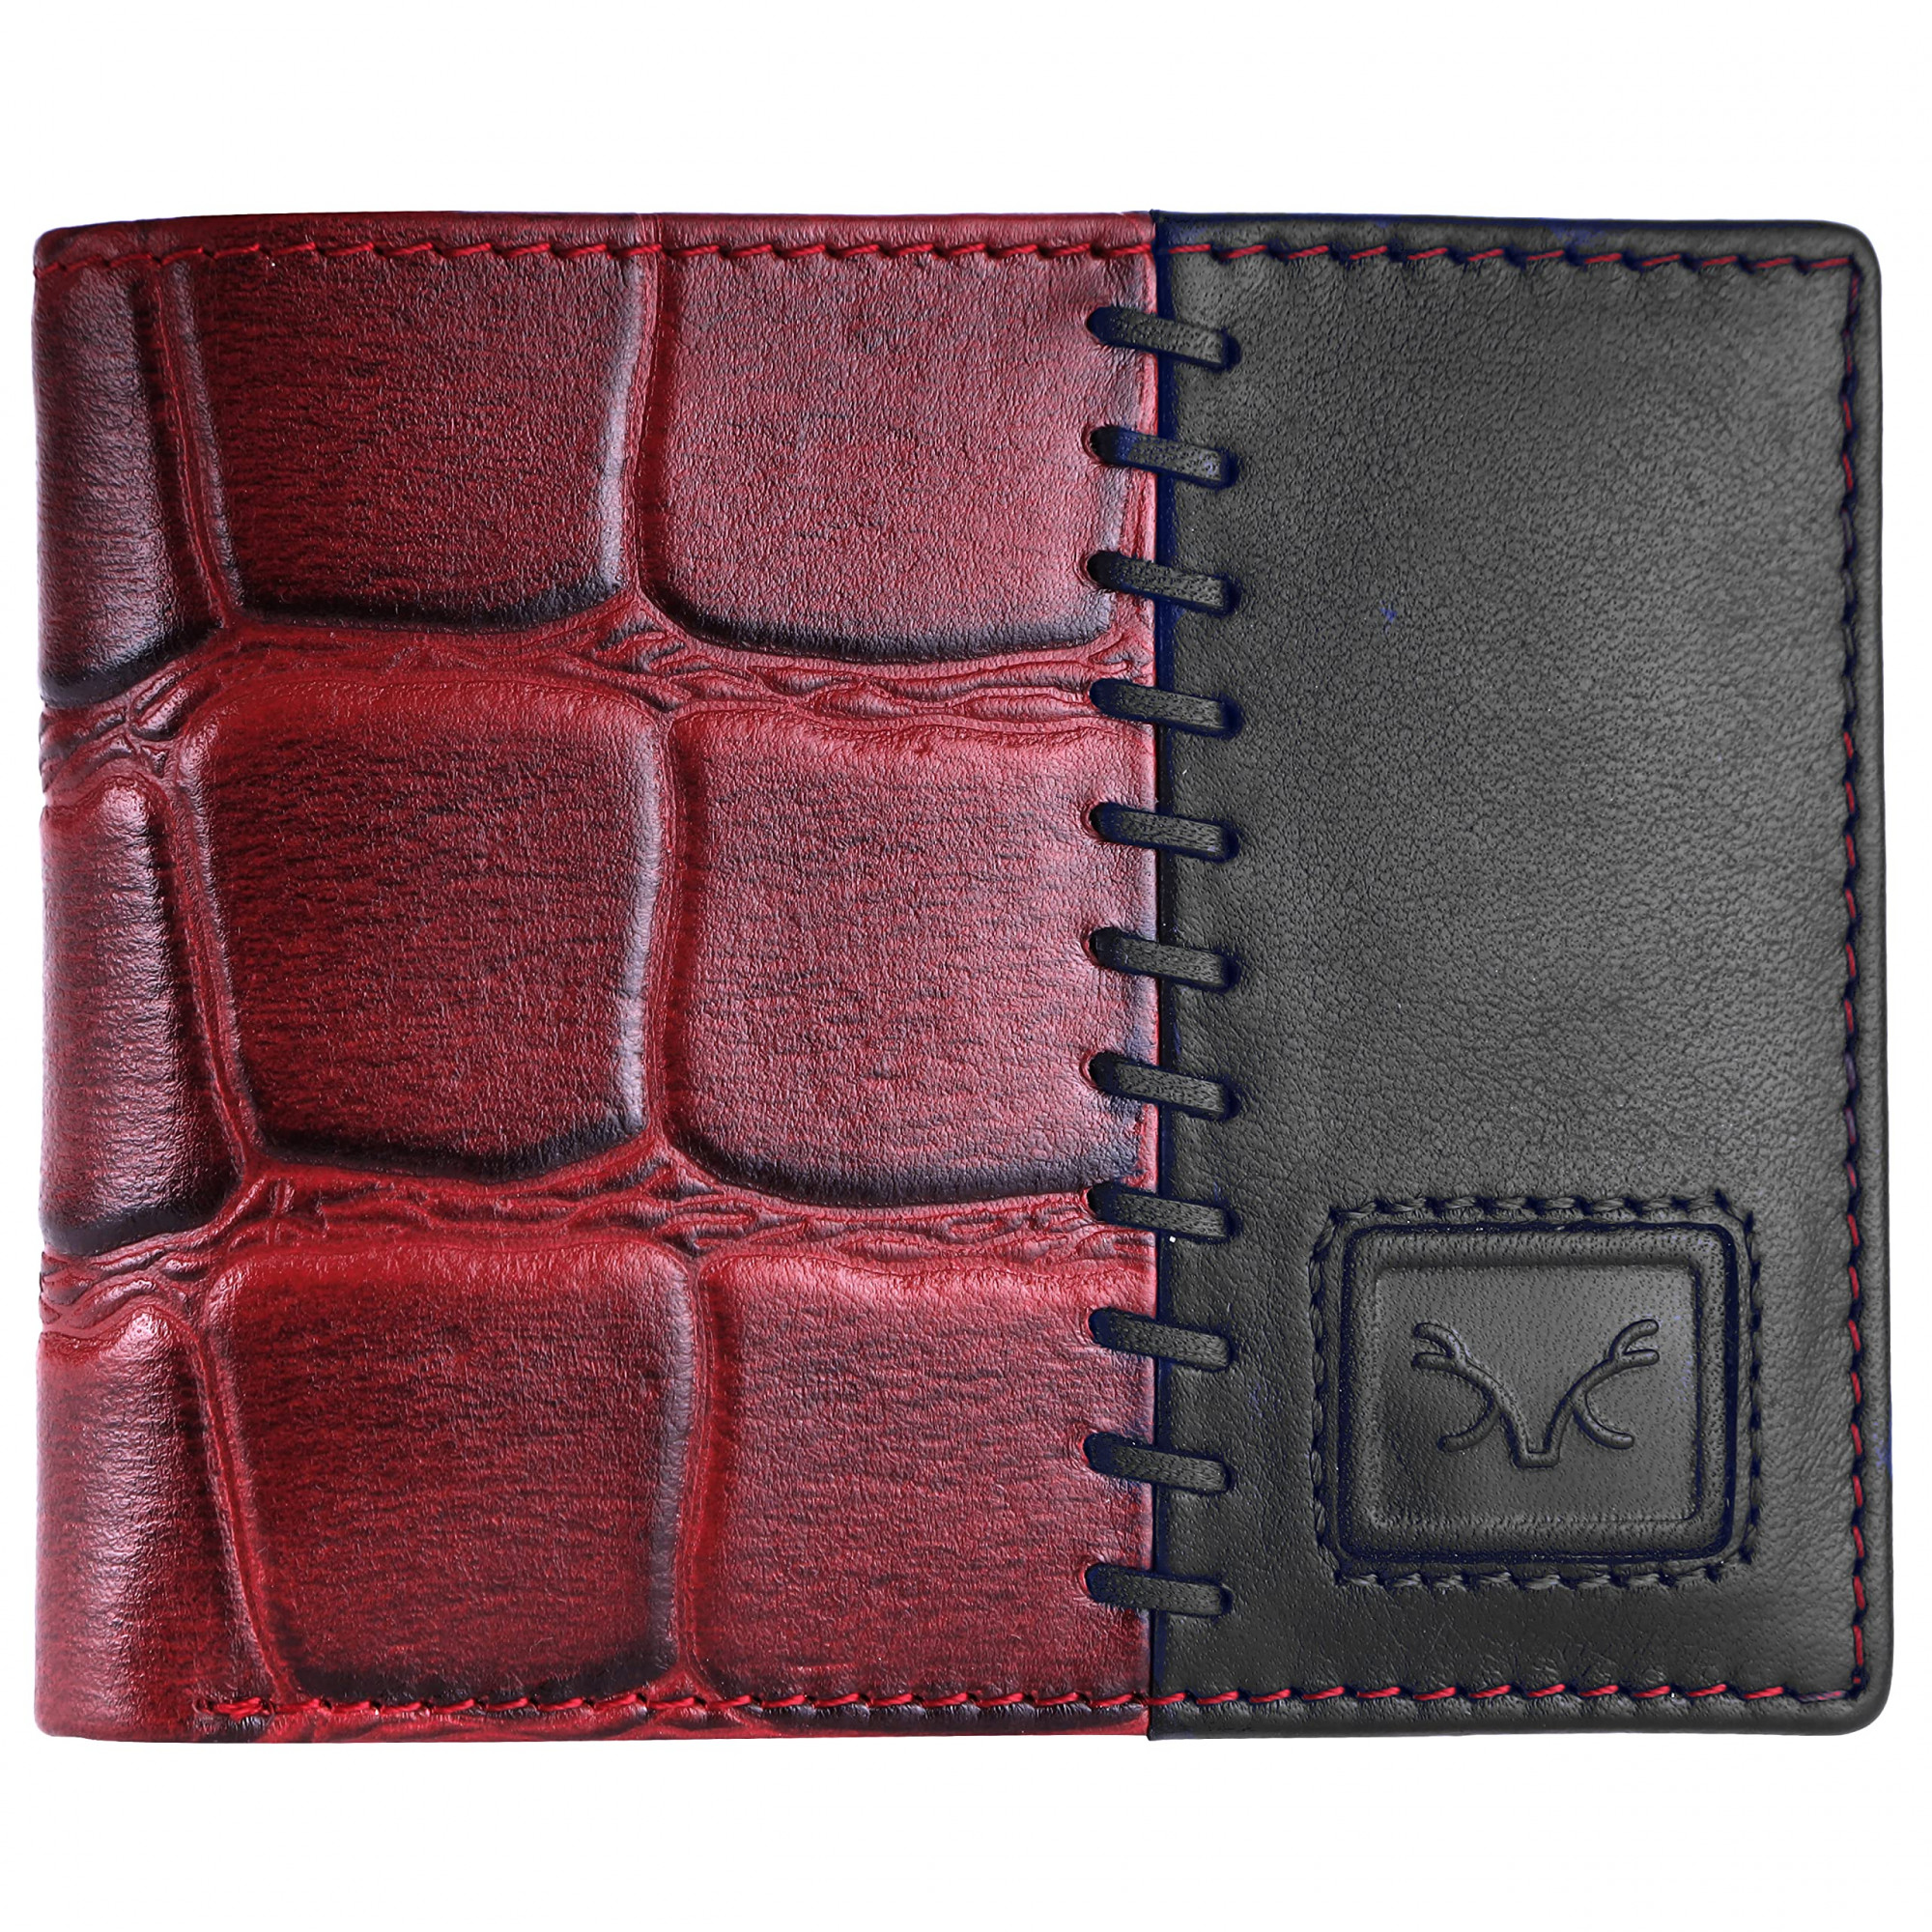 RED GENUINE LEATHER MENS PURSE WALLET MONEY CARD HOLDER SLIM  BI-FOLD-PERFECT CORPORATE, VALENTINE, BIRTHDAY, ANNIVERSARY, THANKSGIVING  GIFT FOR MEN 41 : Amazon.in: Bags, Wallets and Luggage